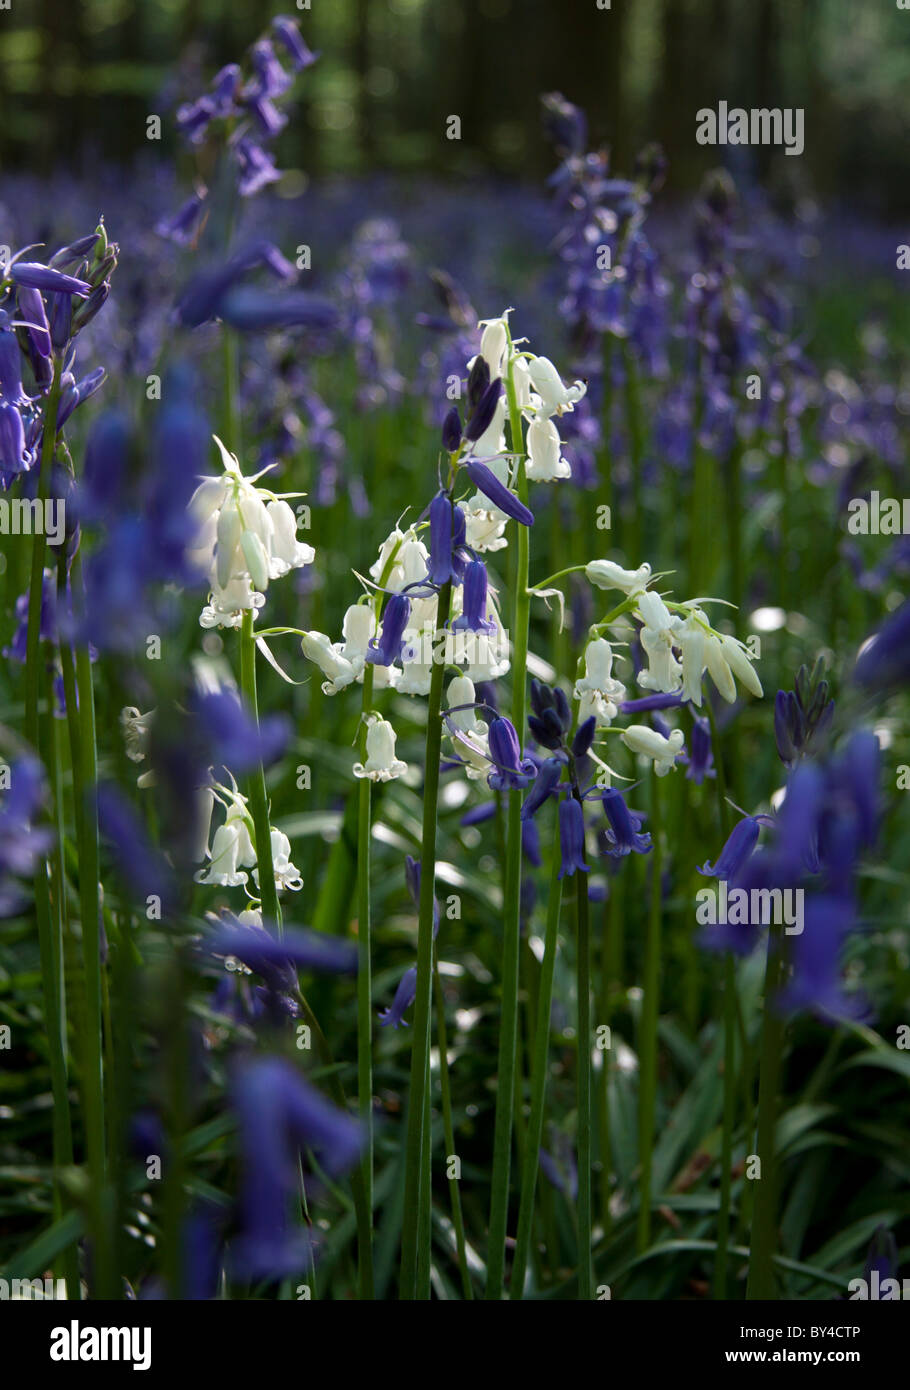 'White bluebells' growing amongst bluebells in a Wiltshire woodland. Stock Photo